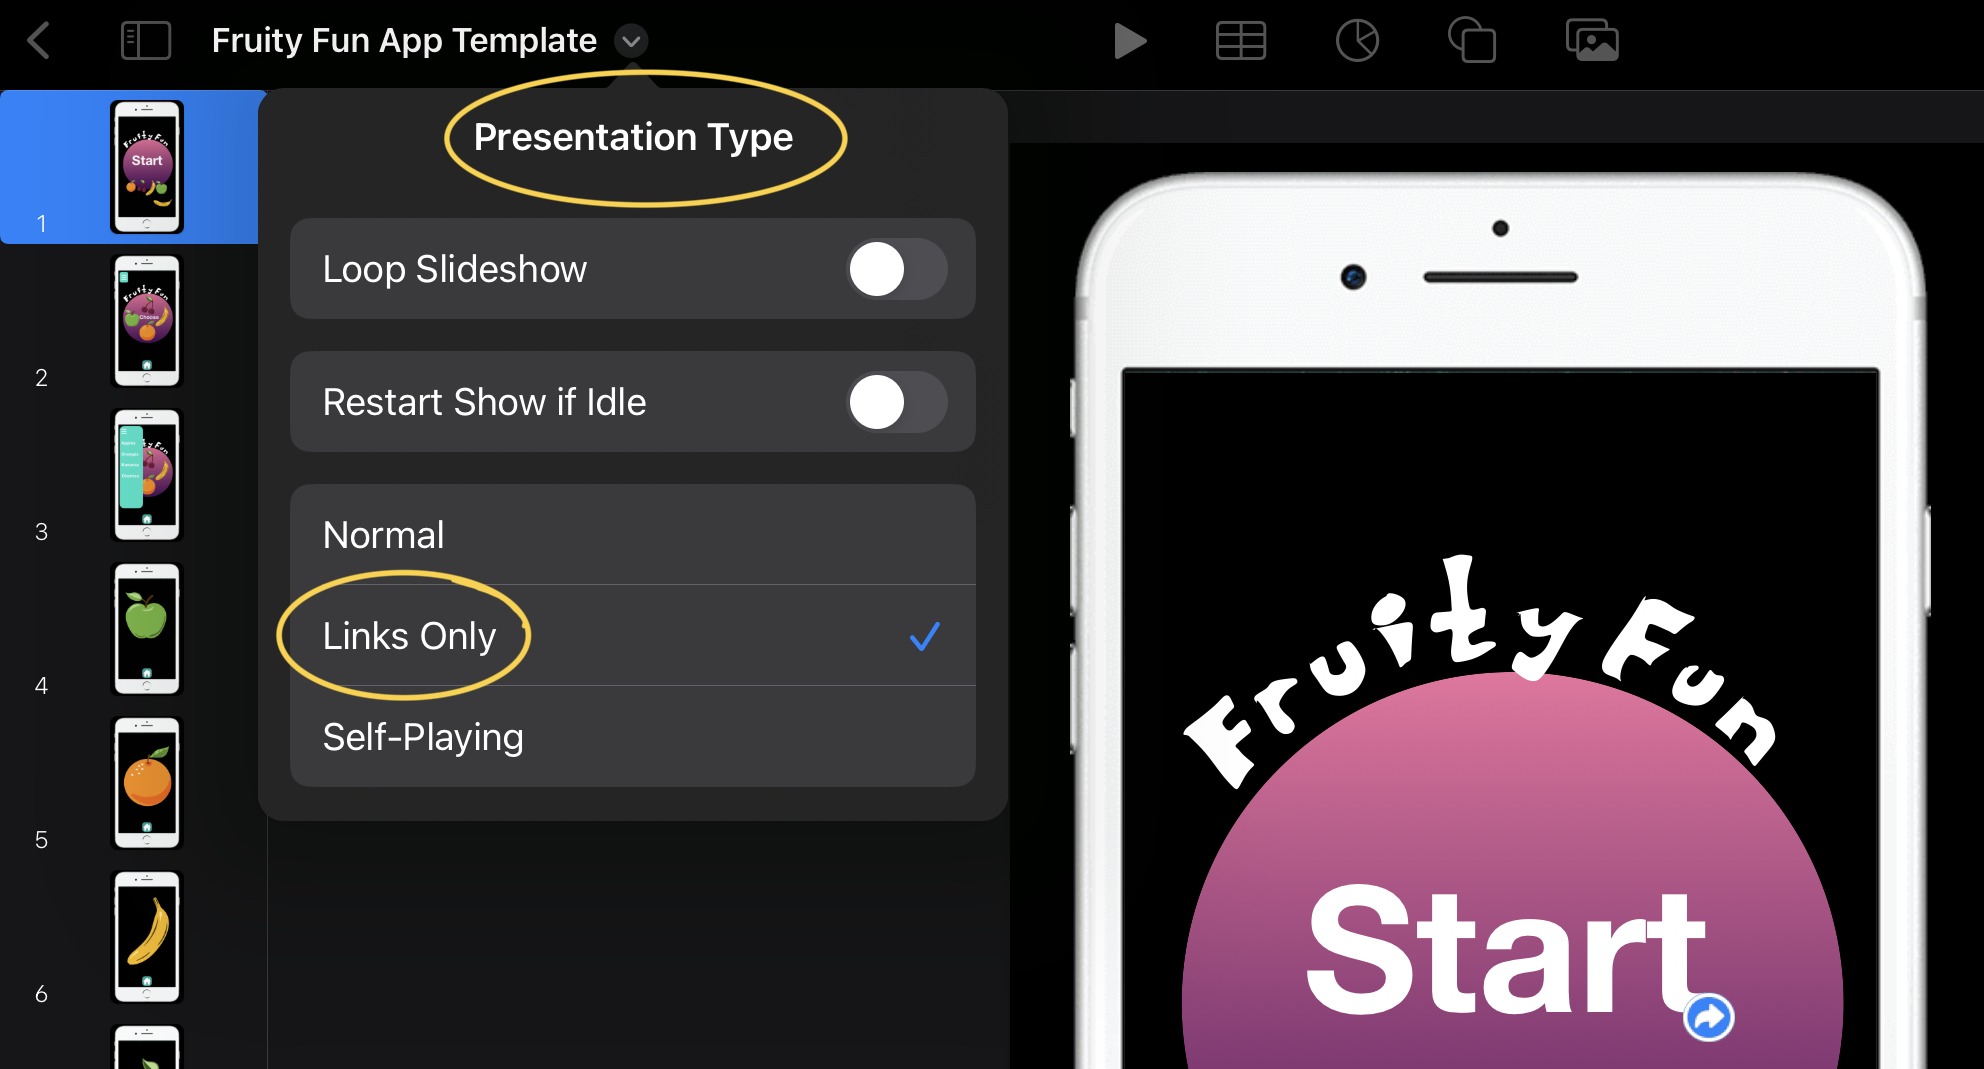 Screenshot to show the step to set 'links only' for the presentation type in Keynote on iPad